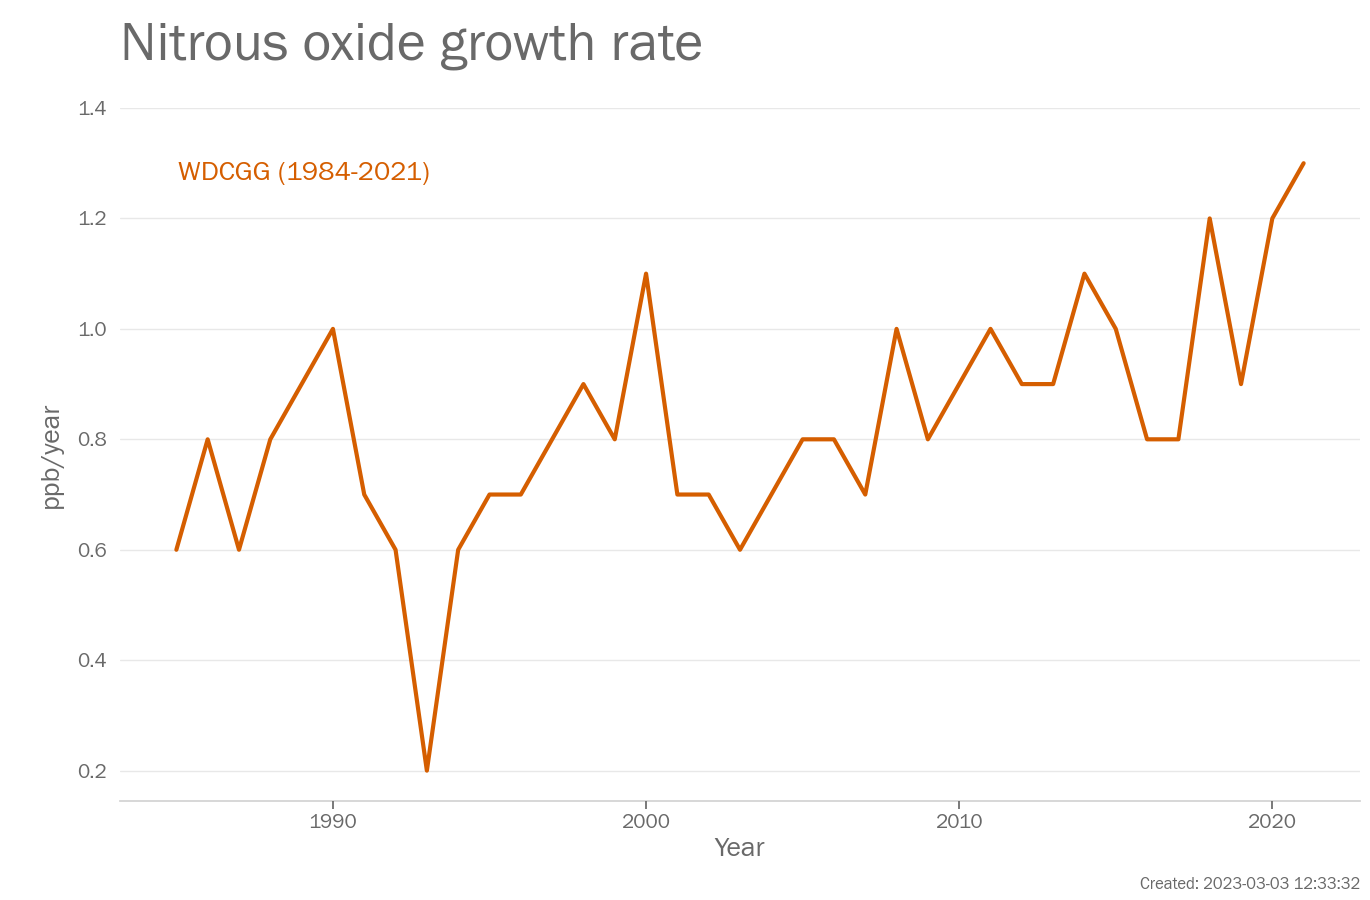 Annual Growth rate of nitrous oxide concentration (ppb/year)  from 1984-2021. Data are from WDCGG.